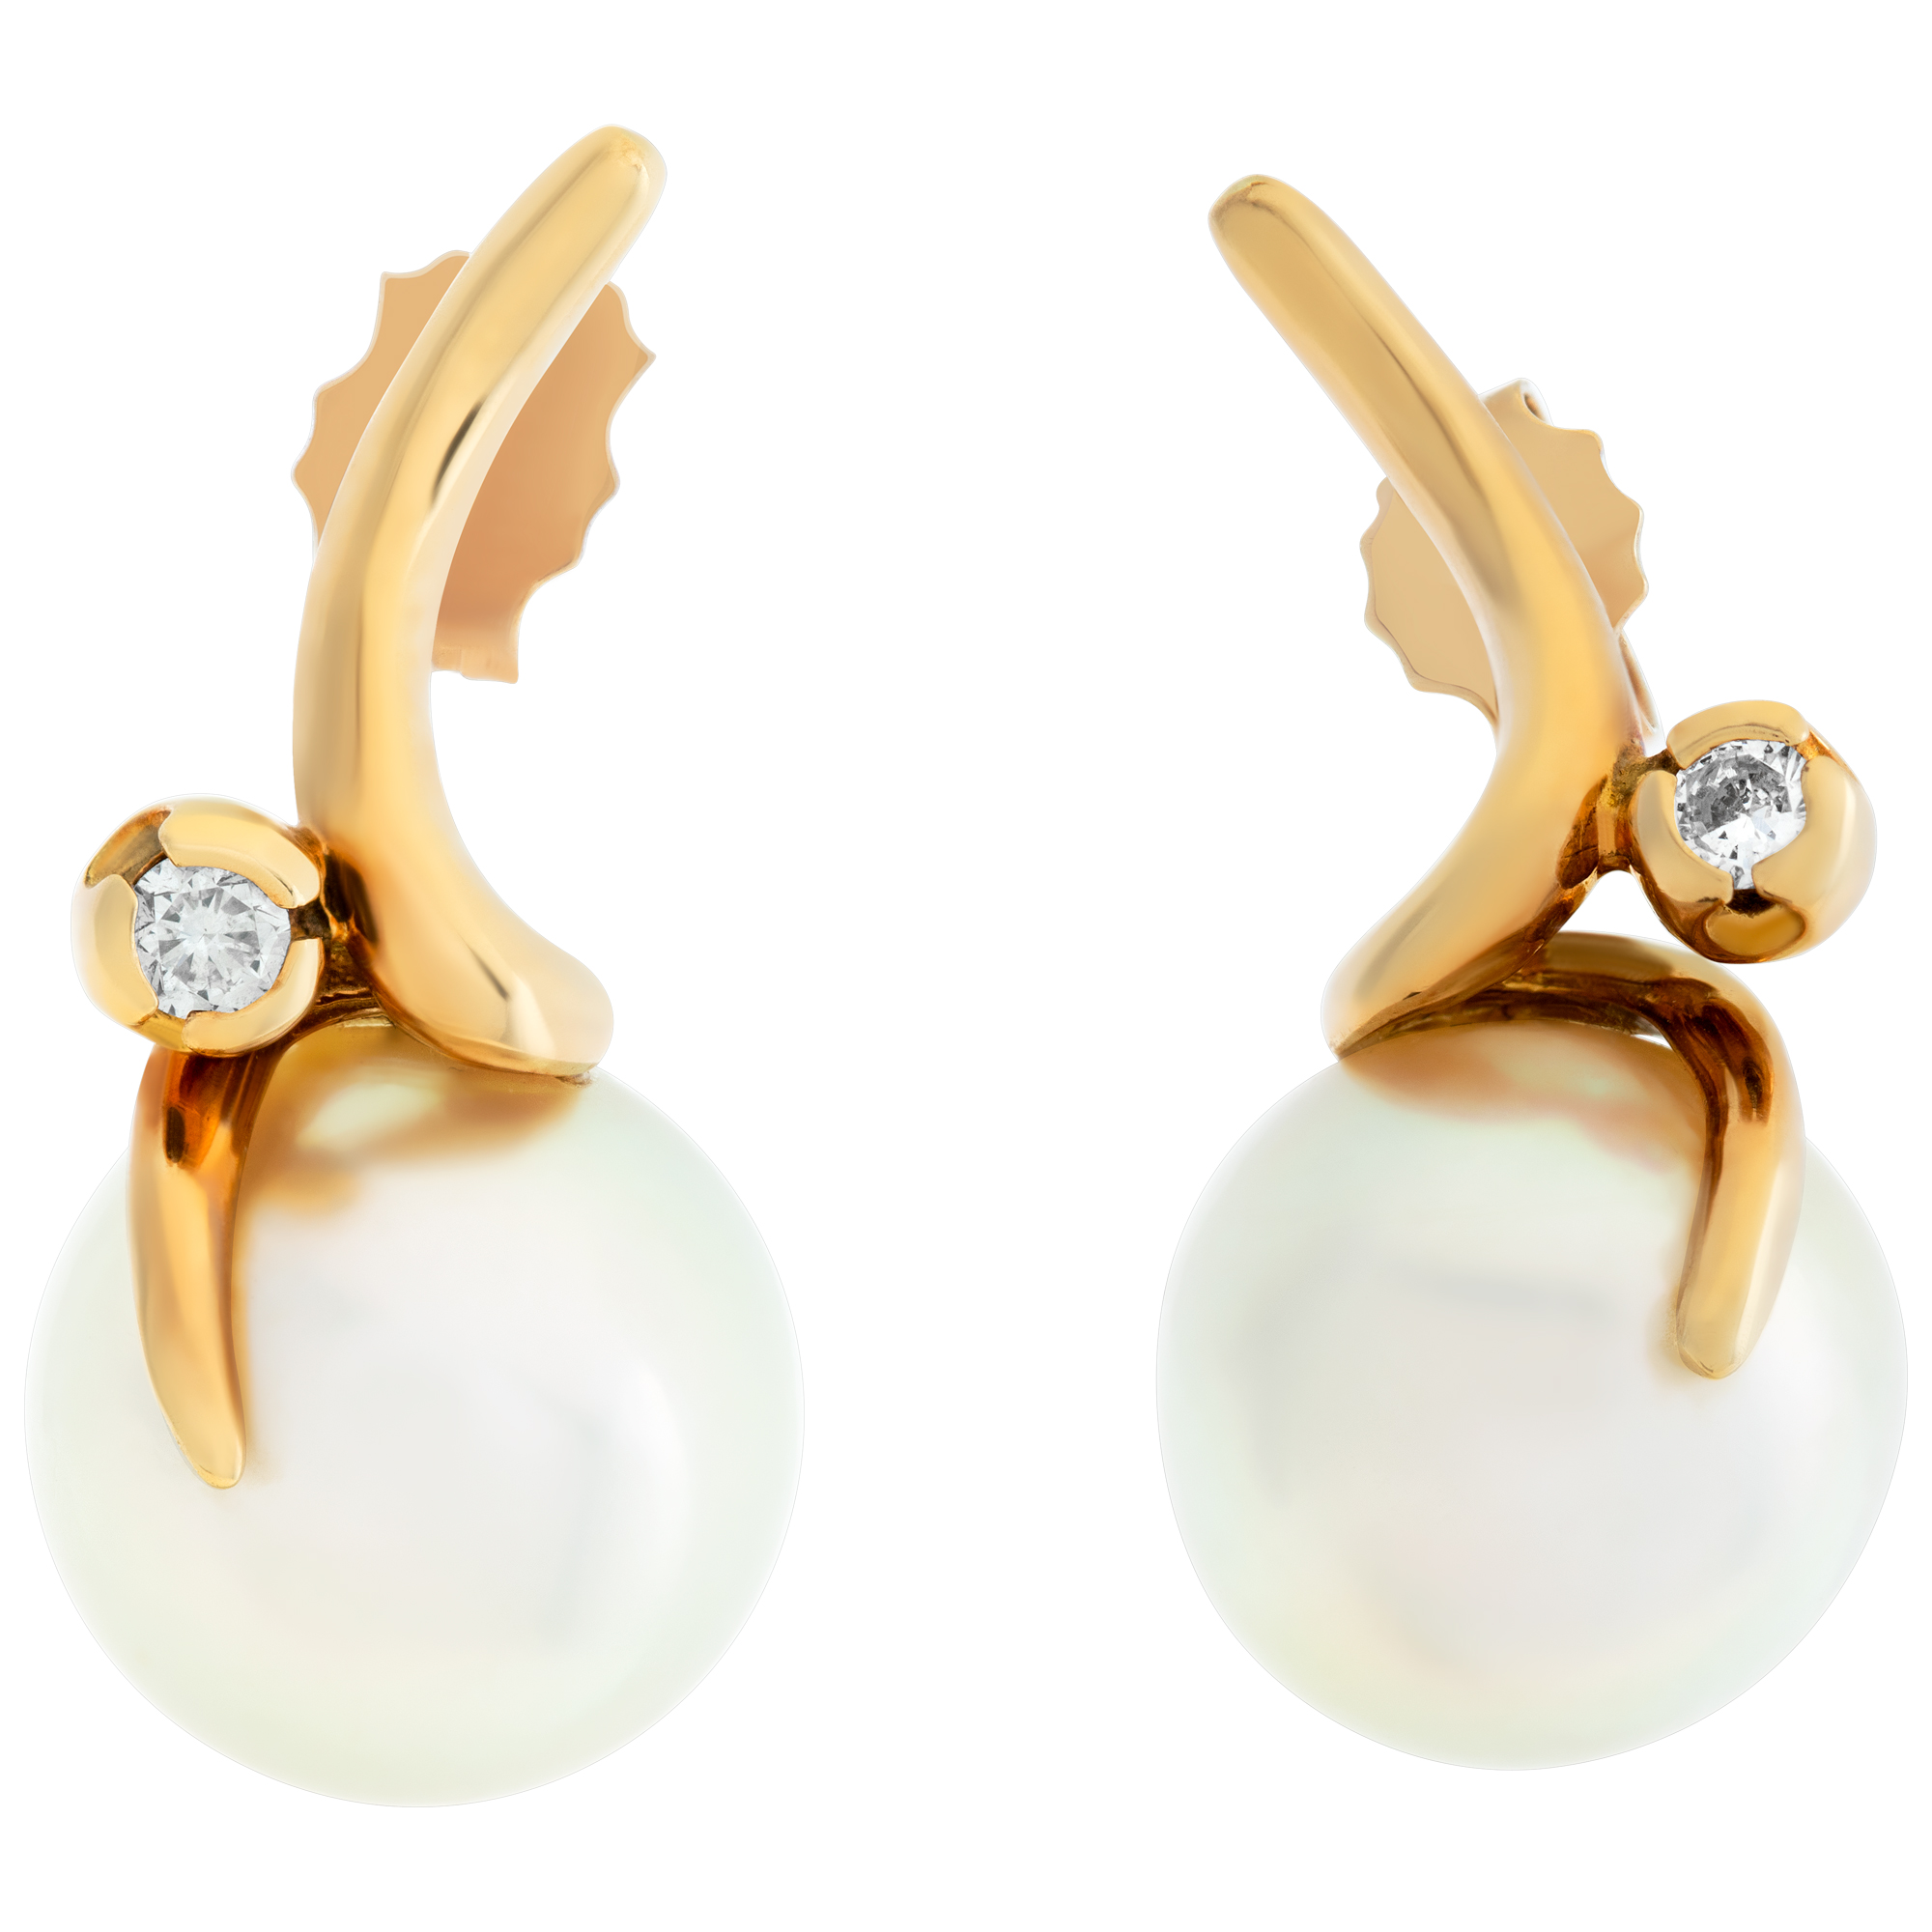 South Sea pearl earrings in 18K yellow gold with diamond accents